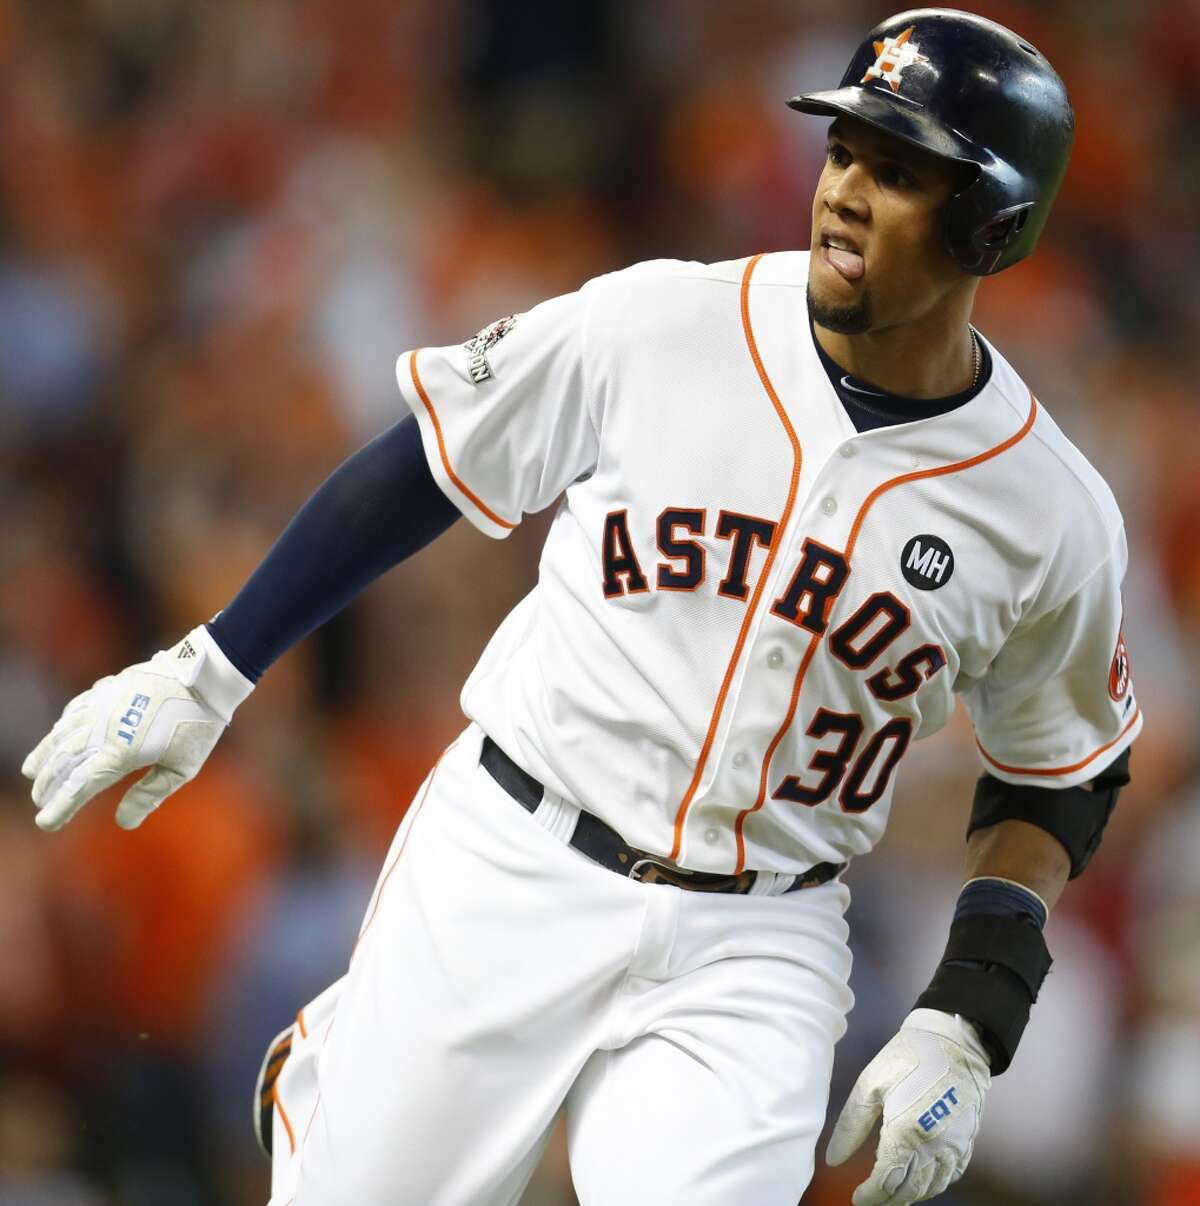 Houston Astros center fielder Carlos Gomez (30) rounds the bases after hitting a solo home run off Kansas City Royals starting pitcher Yordano Ventura during the second inning of Game 4 of the American League Division Series at Minute Maid Park on Monday, Oct. 12, 2015, in Houston. ( Brett Coomer / Houston Chronicle )